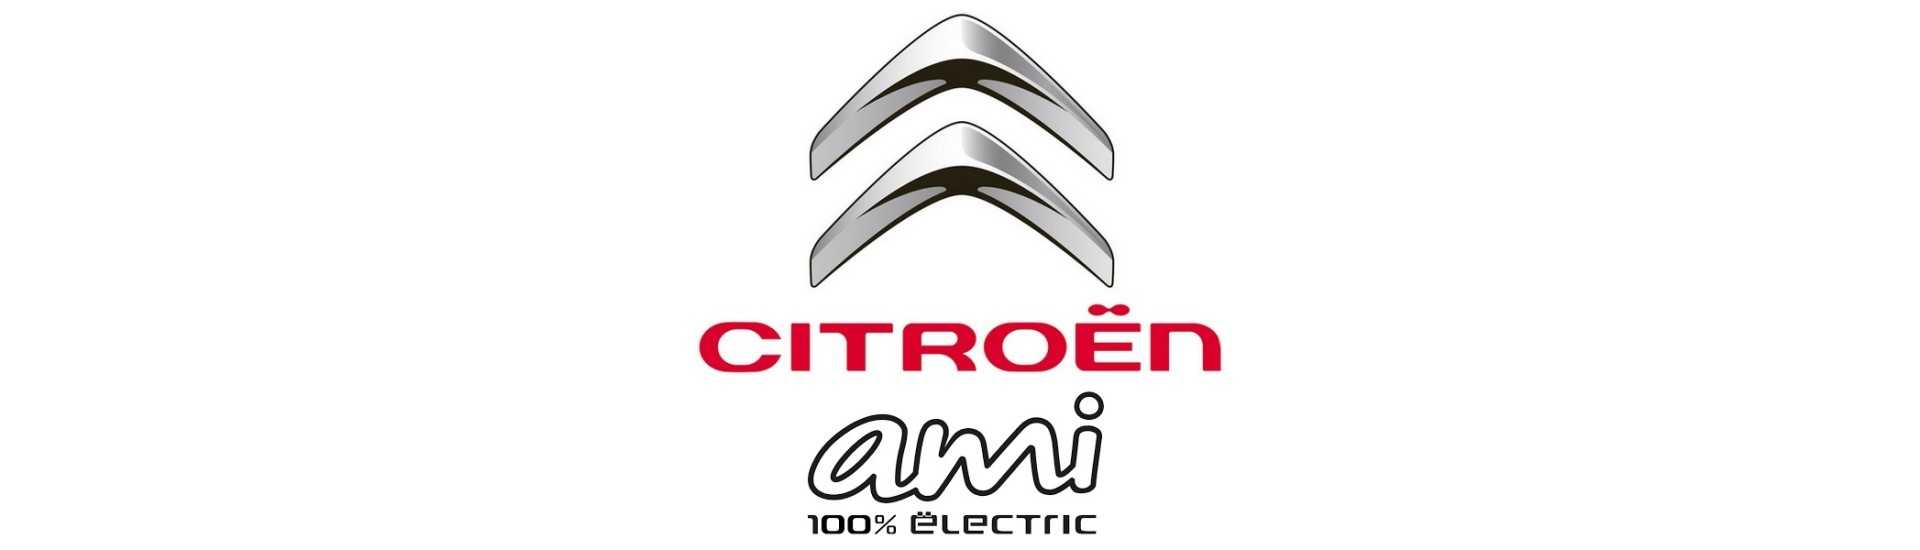 Clothing door lock at best price car without permit Citroën